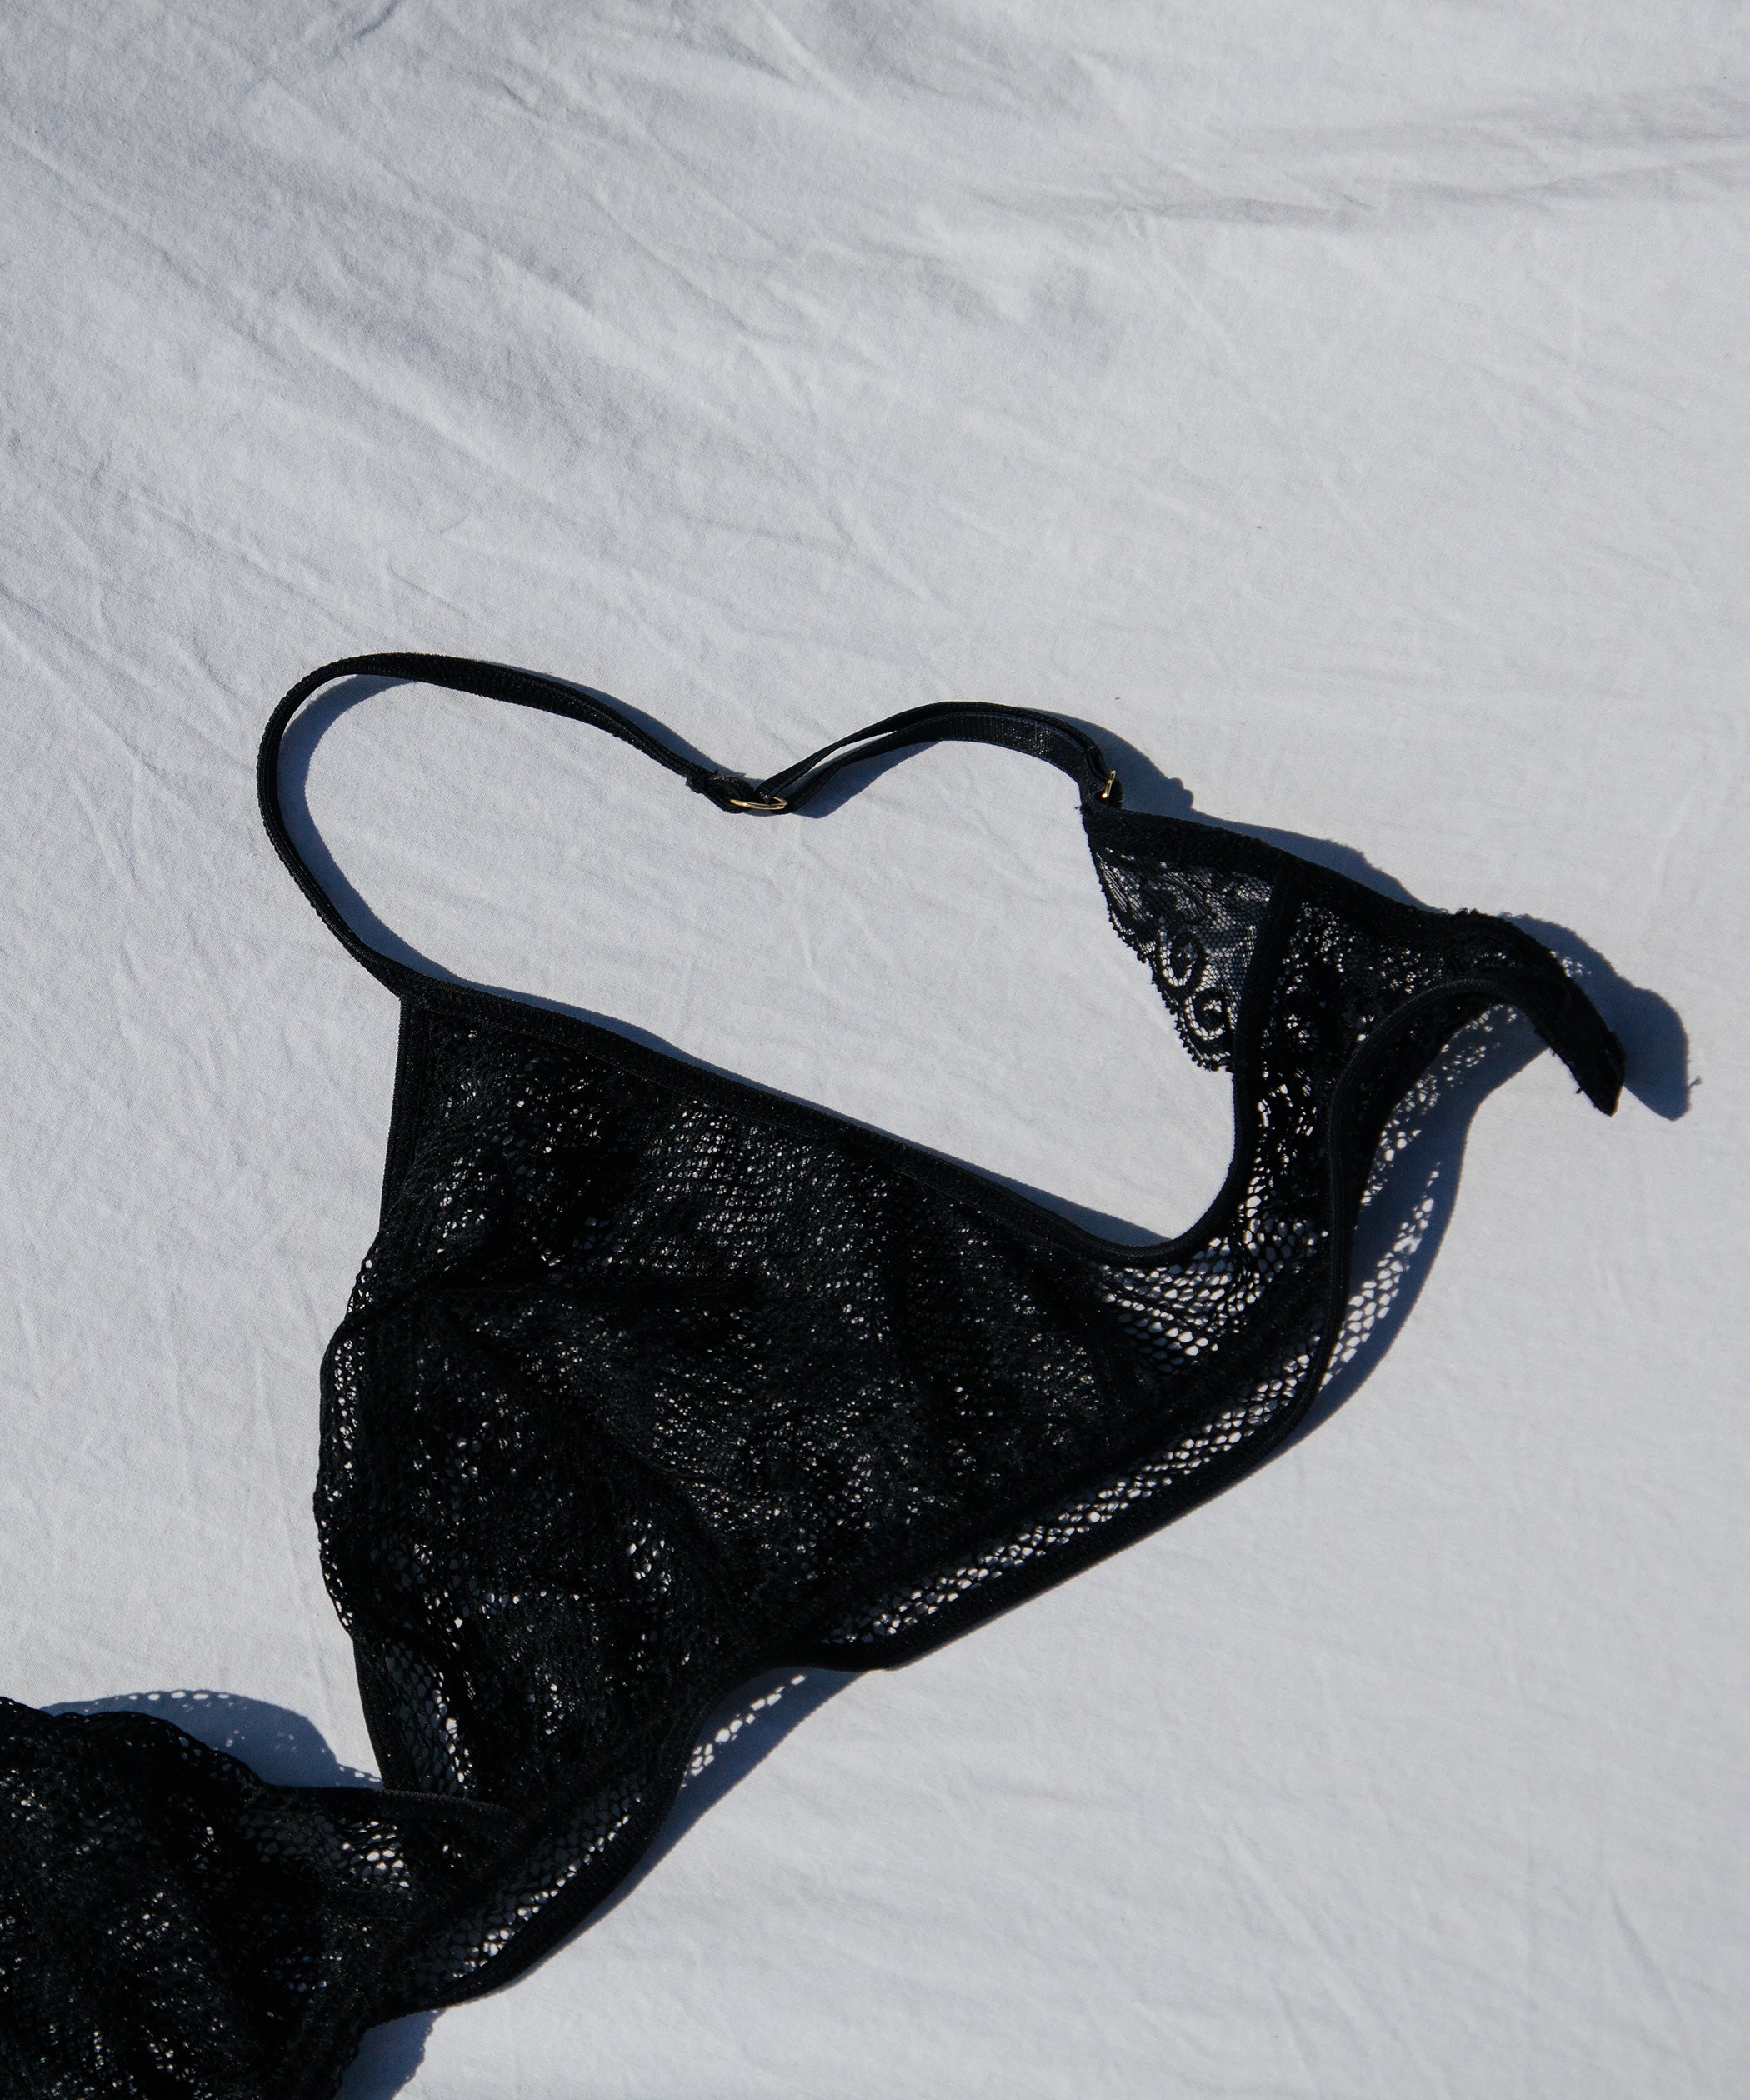 Men in Bras, Panties and Dresses: The Secret Truths About